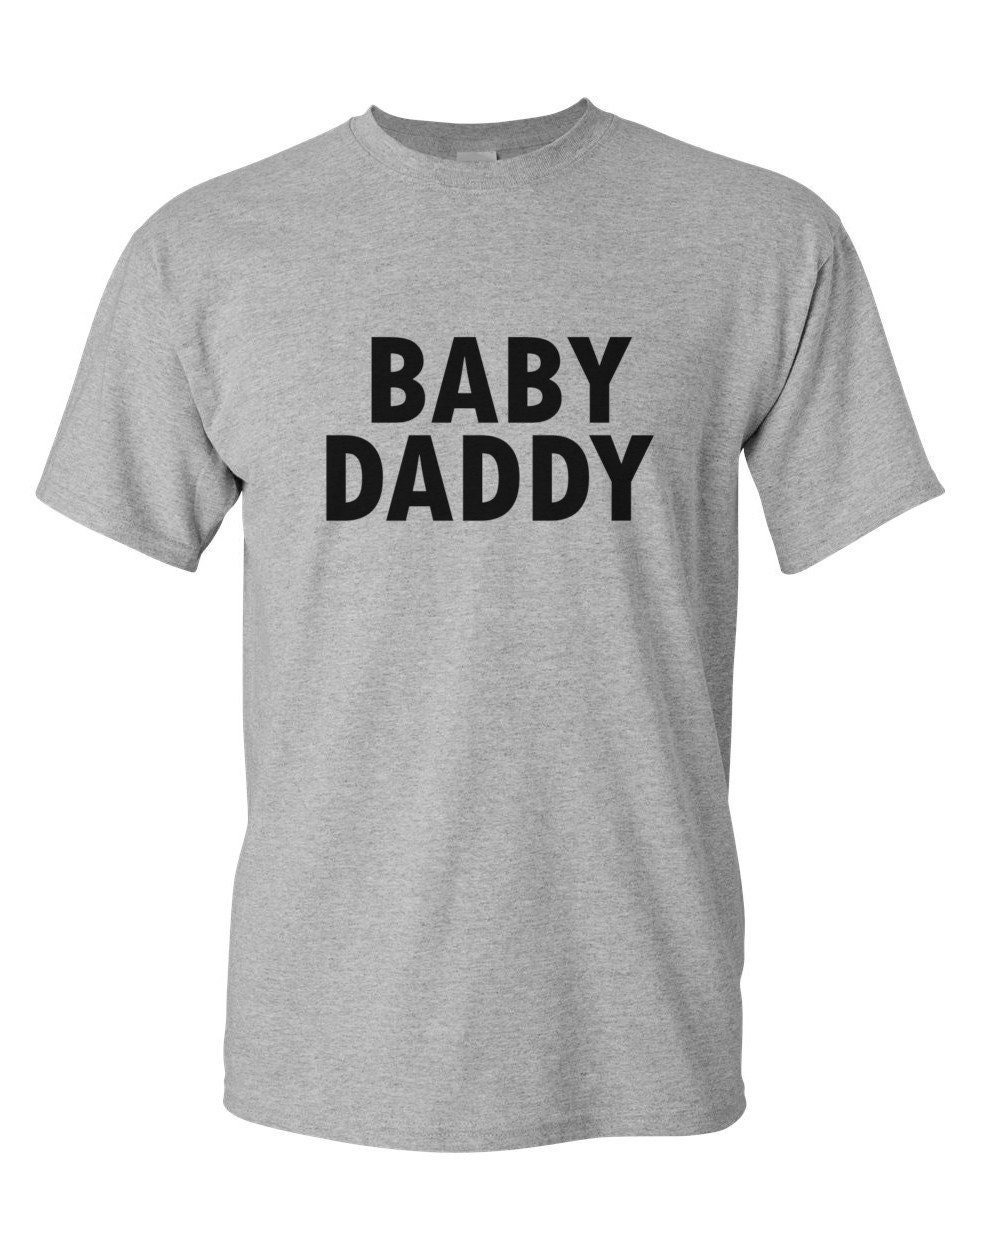 Baby Daddy T Shirt - Funny Shirt for Men, Gift From Daughter, Daddy ...